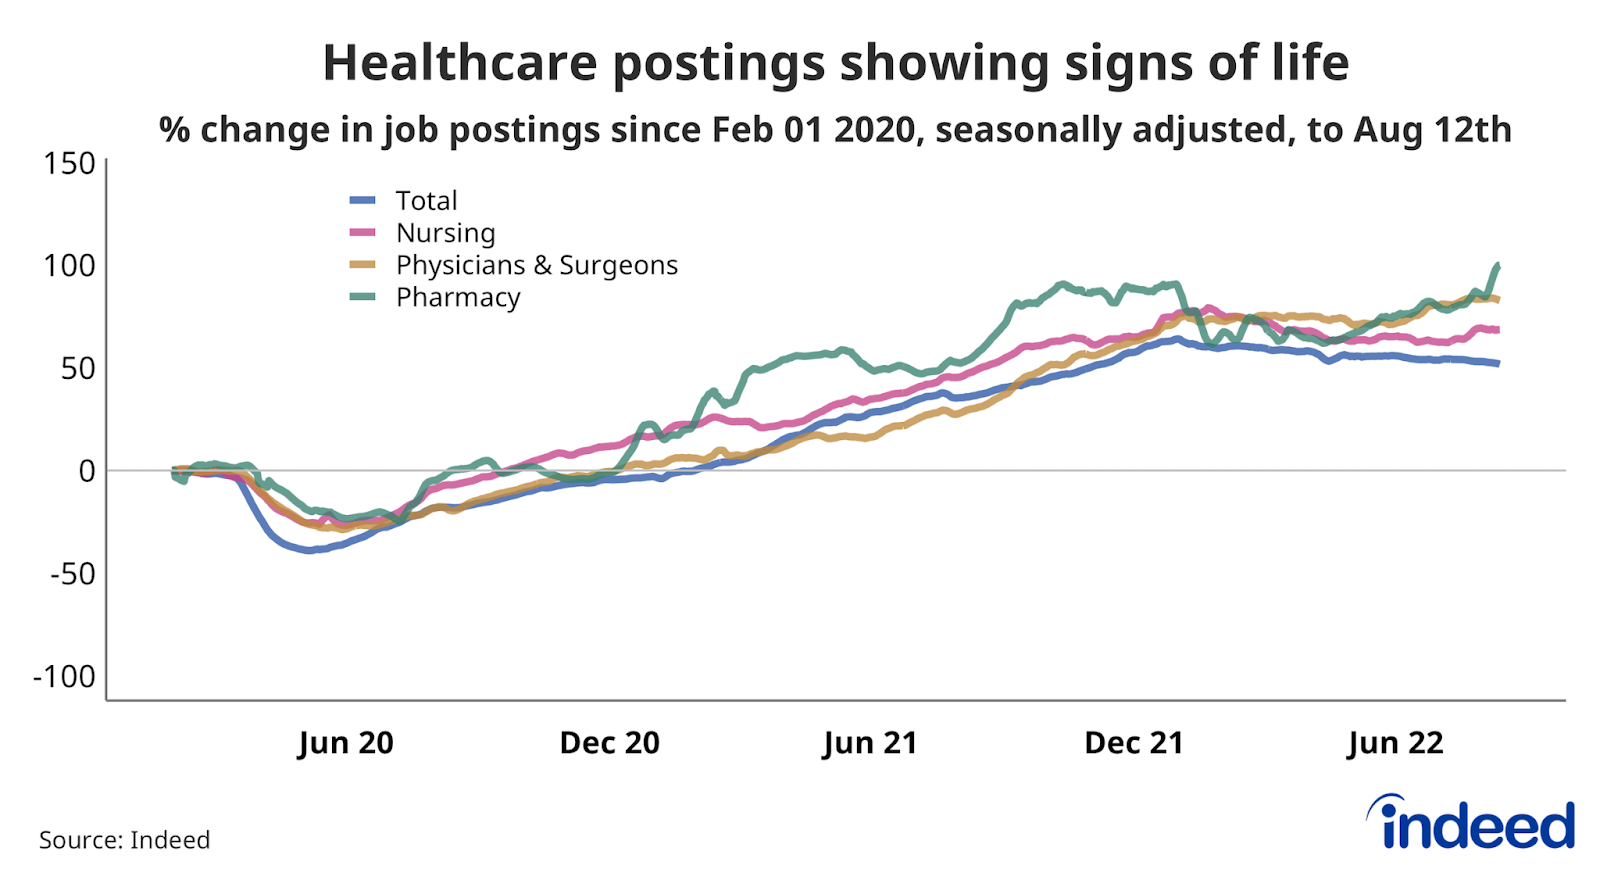 Line graph showing % change in job postings for the healthcare vertical, seasonally adjusted, to Aug 12th.